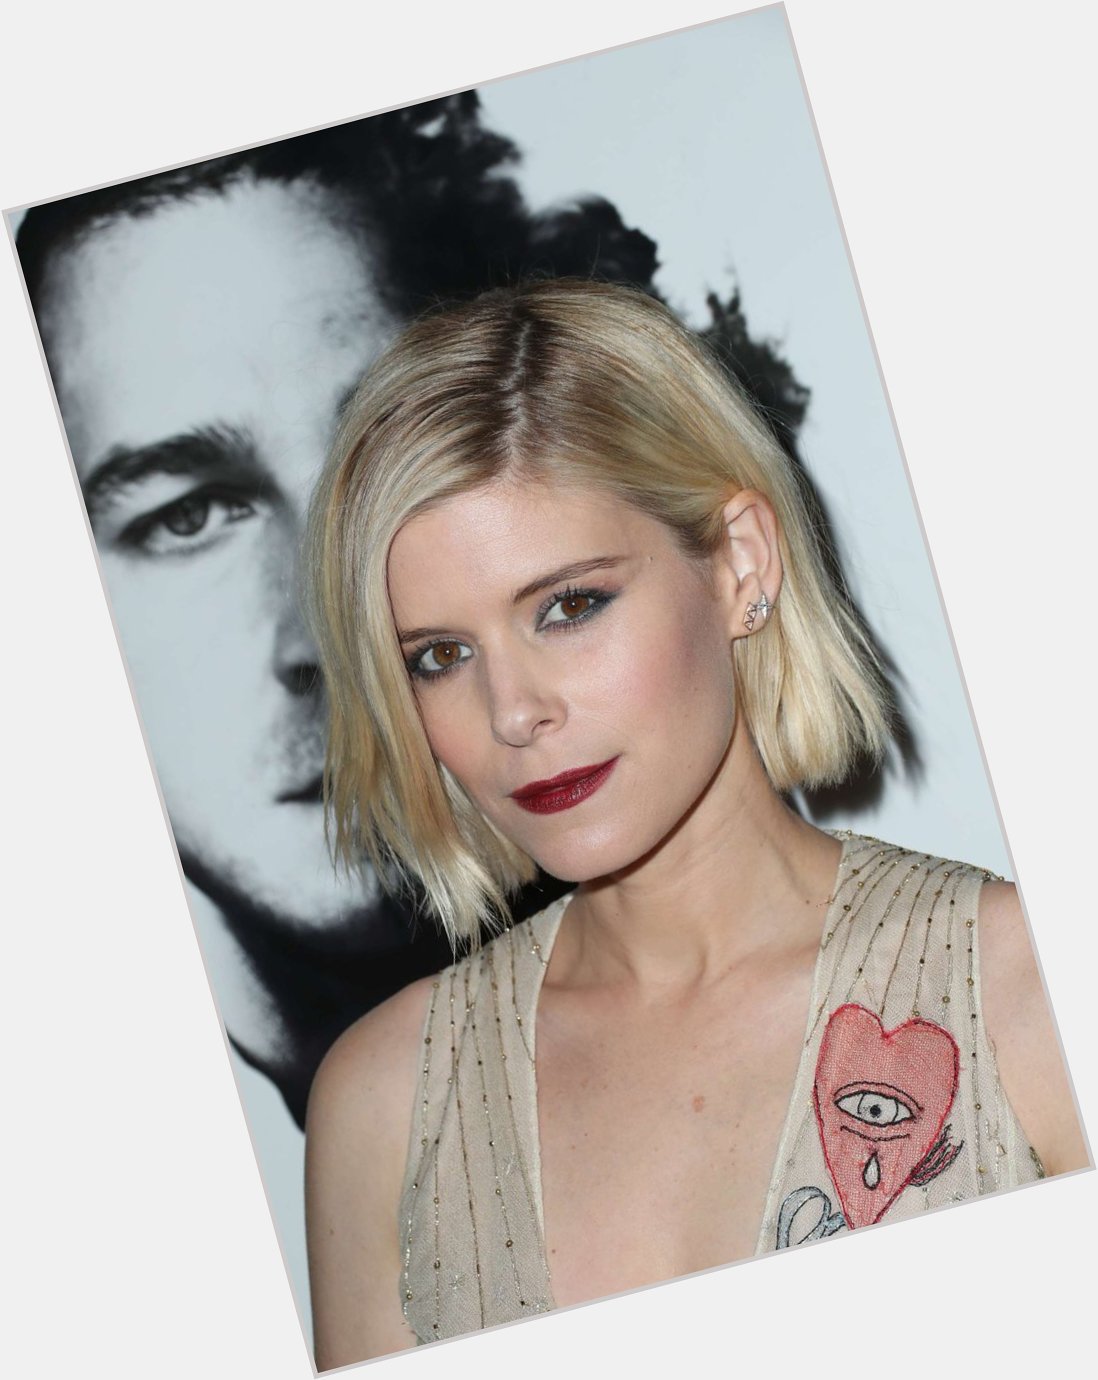 Wishing Kate Mara a very happy birthday!
Watch Kate in the \"Phenomenal\" and \"Powerful\" Man Down. Out March 31st 